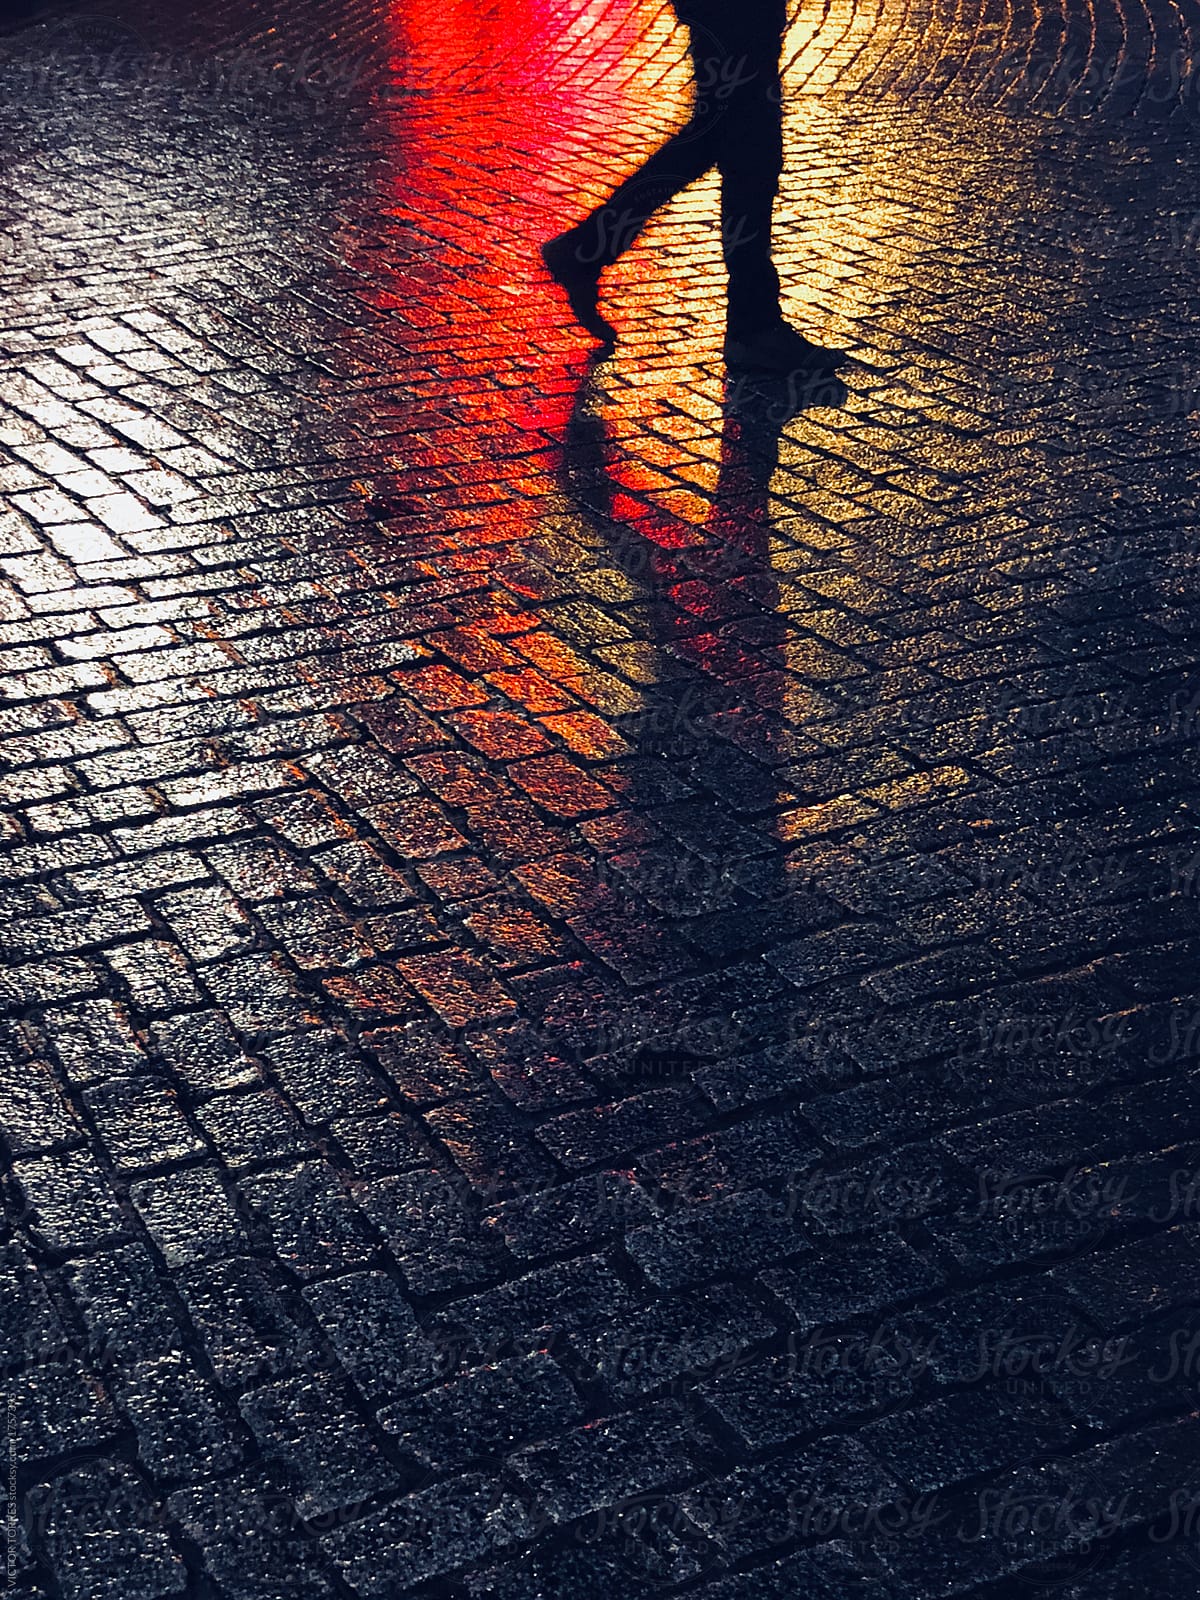 Unrecognizable person walking on asphalt by night